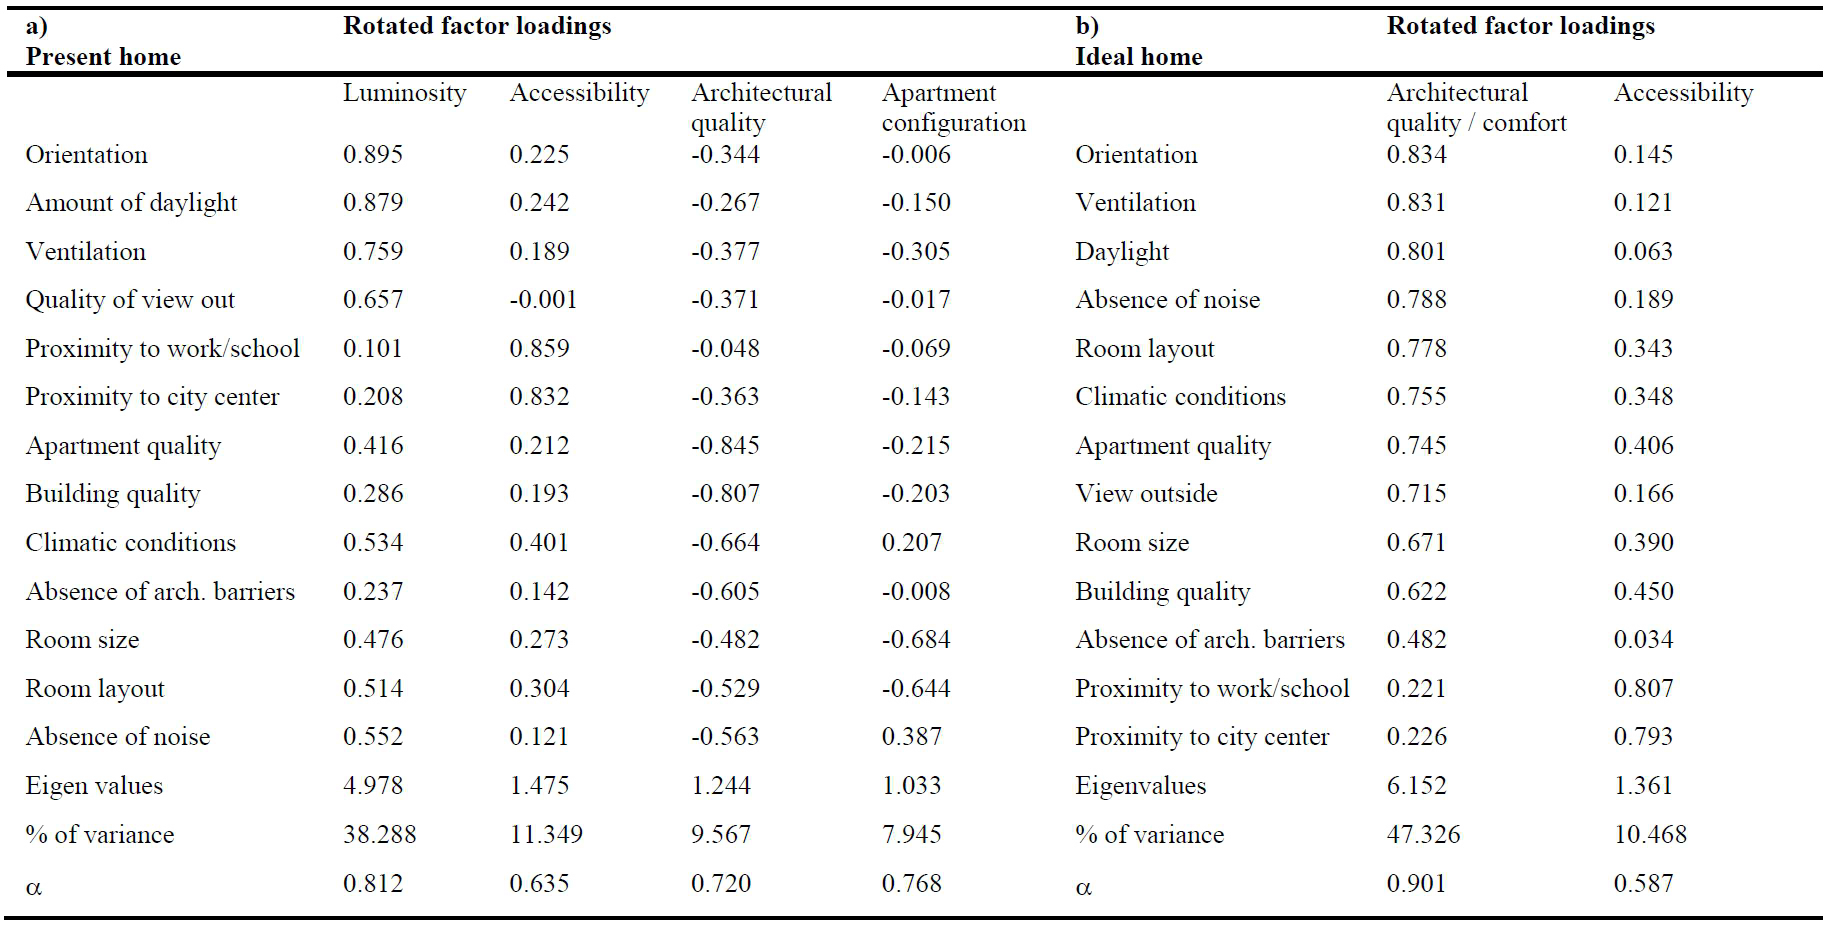 Summary of exploratory factor analysis results for satisfaction with present home and with the ideal home.